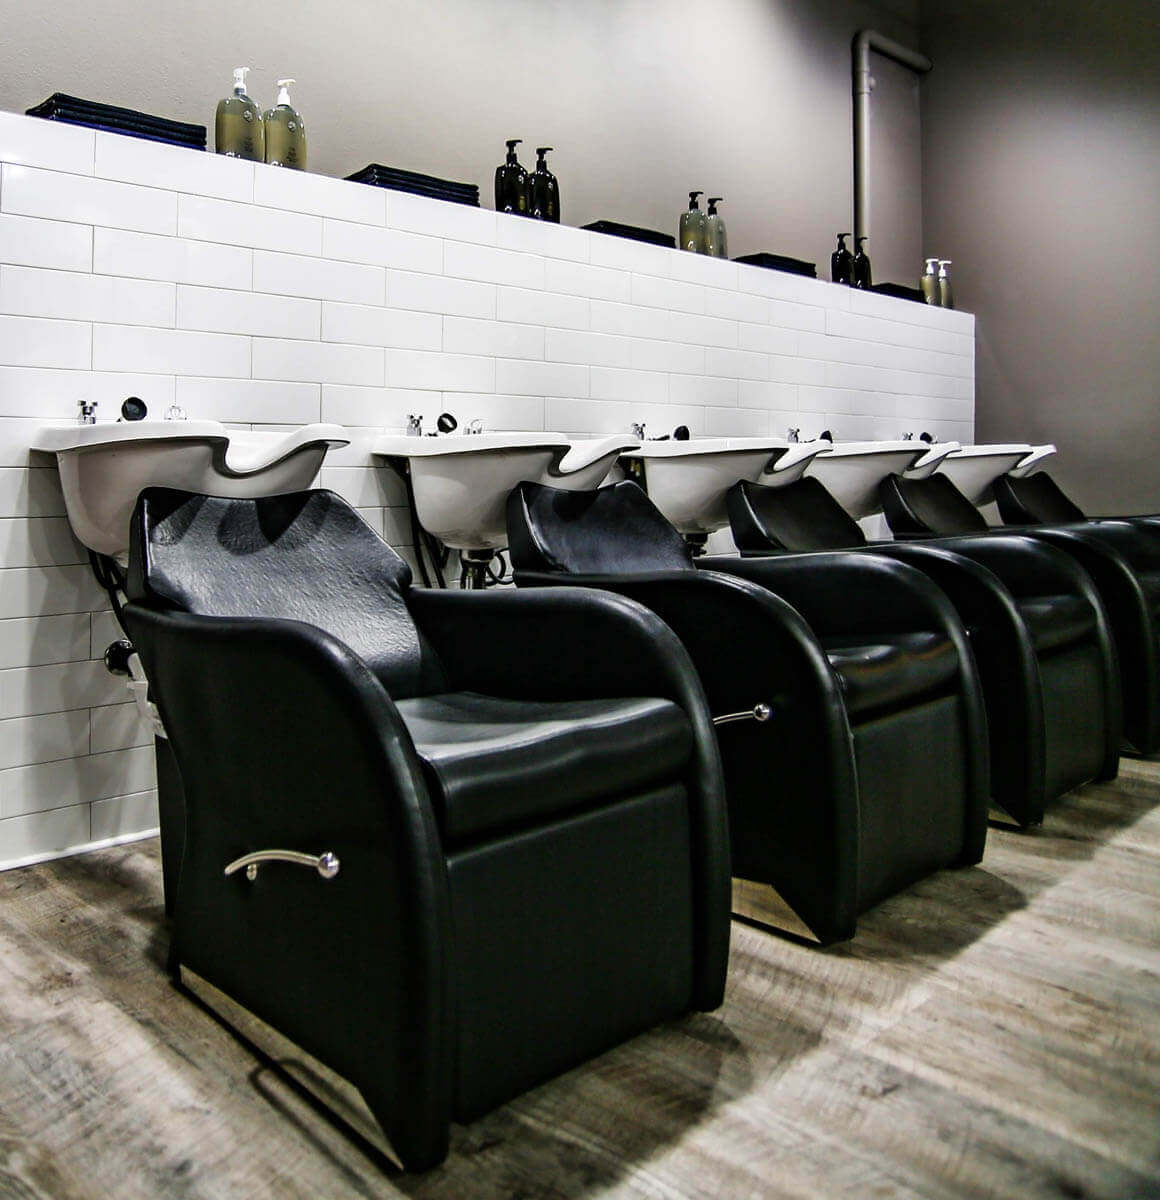 Line of black armchairs at Stan Parente Salon's washing stations